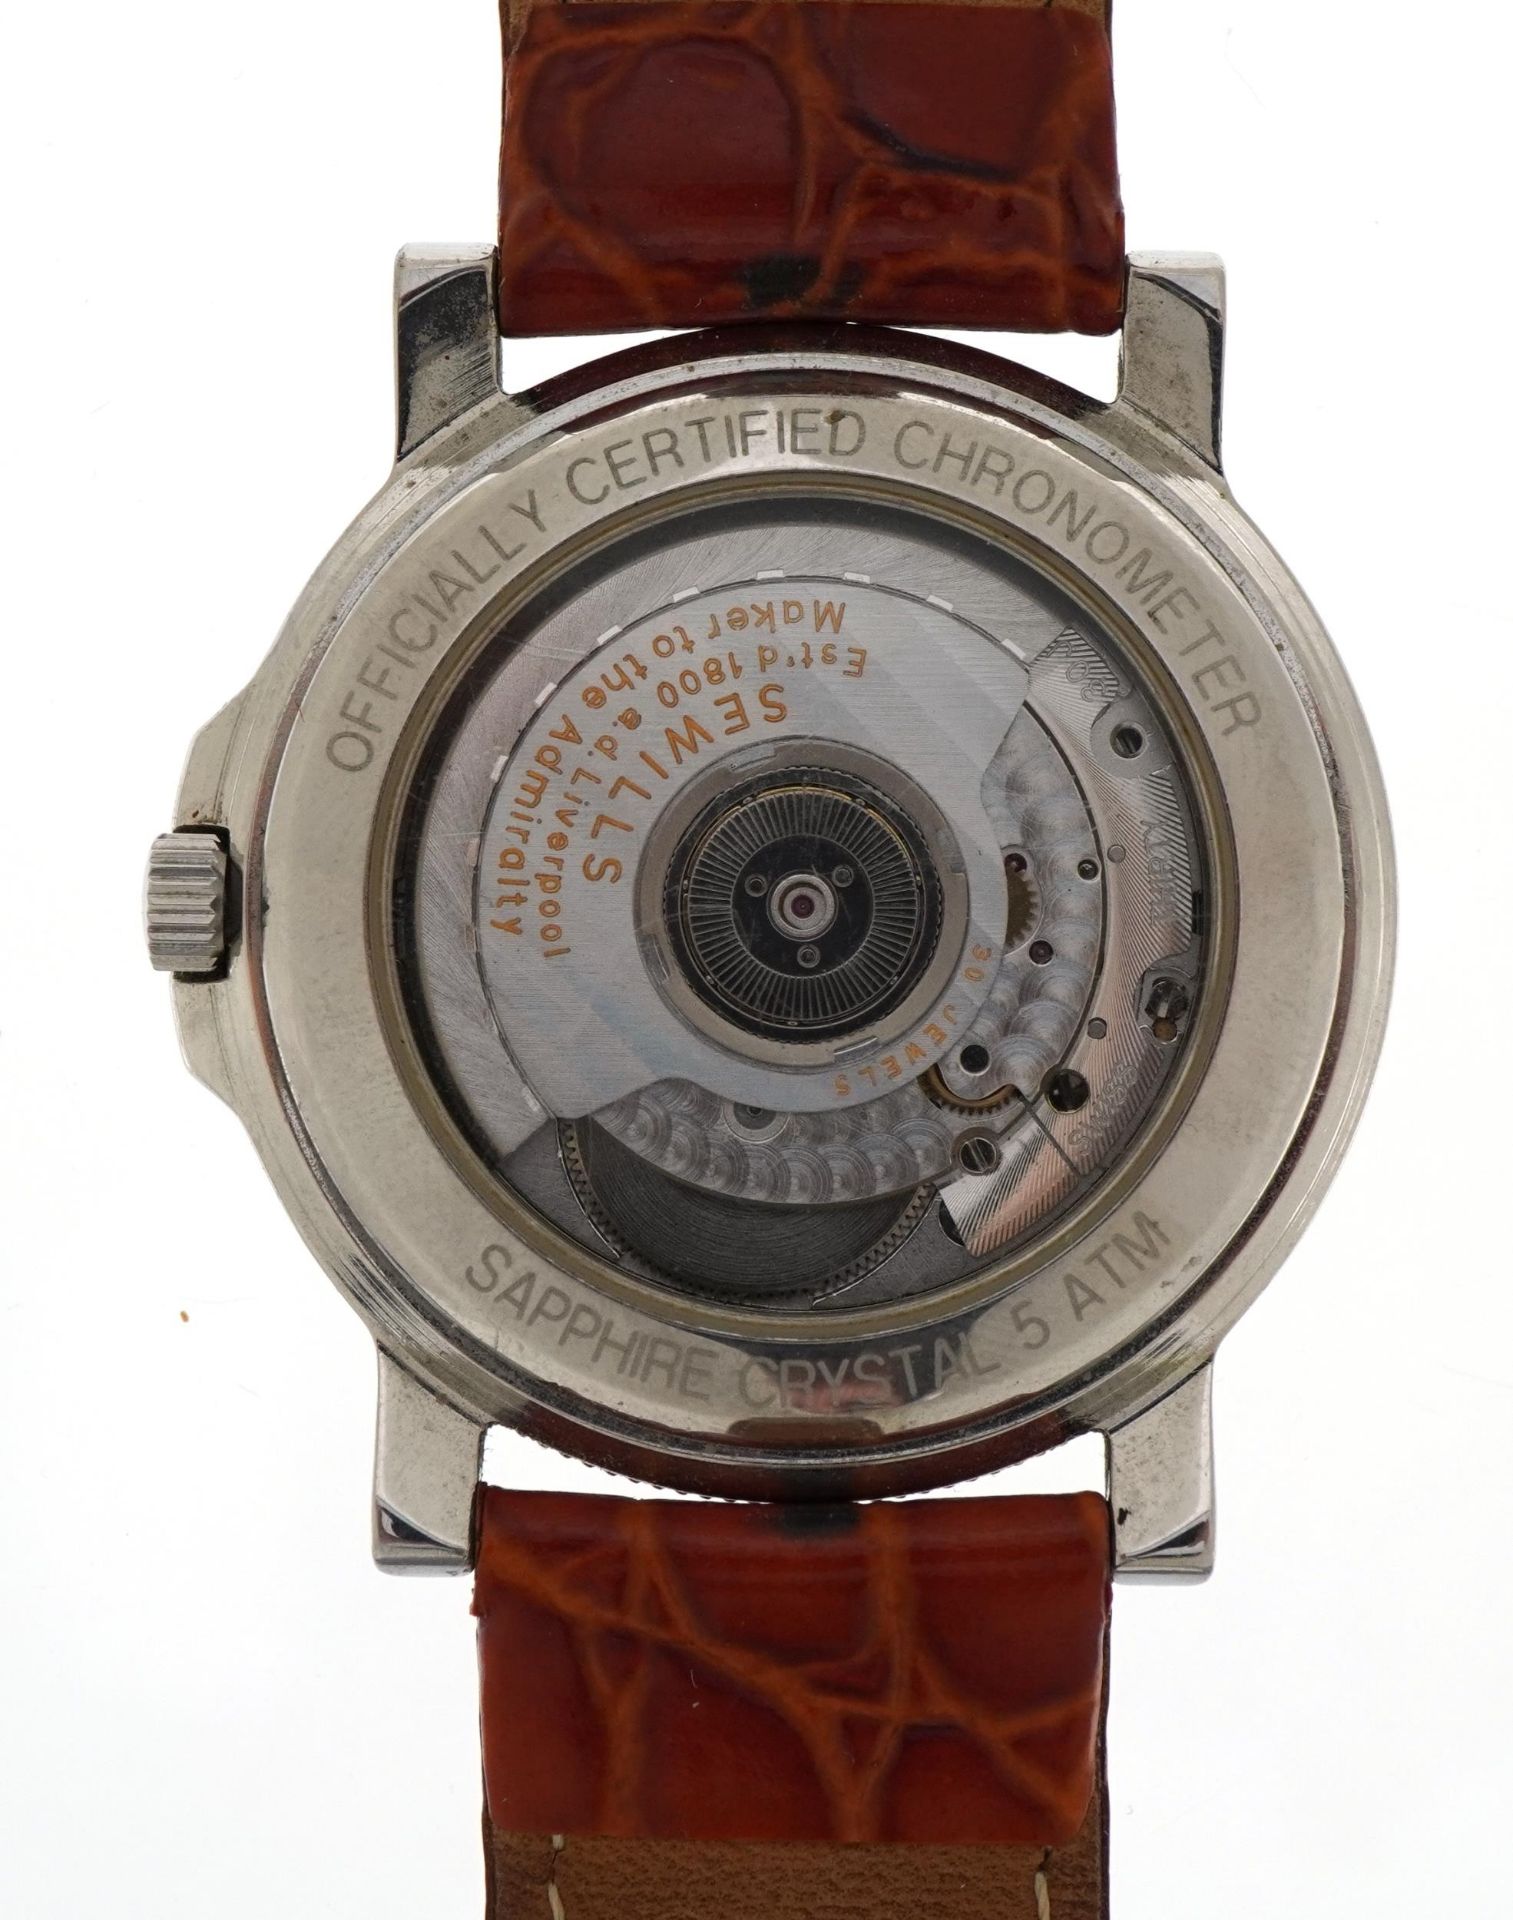 Sewills, gentlemen's Sewills Ark Royal chronometer wristwatch, the movement numbered 0153, 38mm in - Image 3 of 4